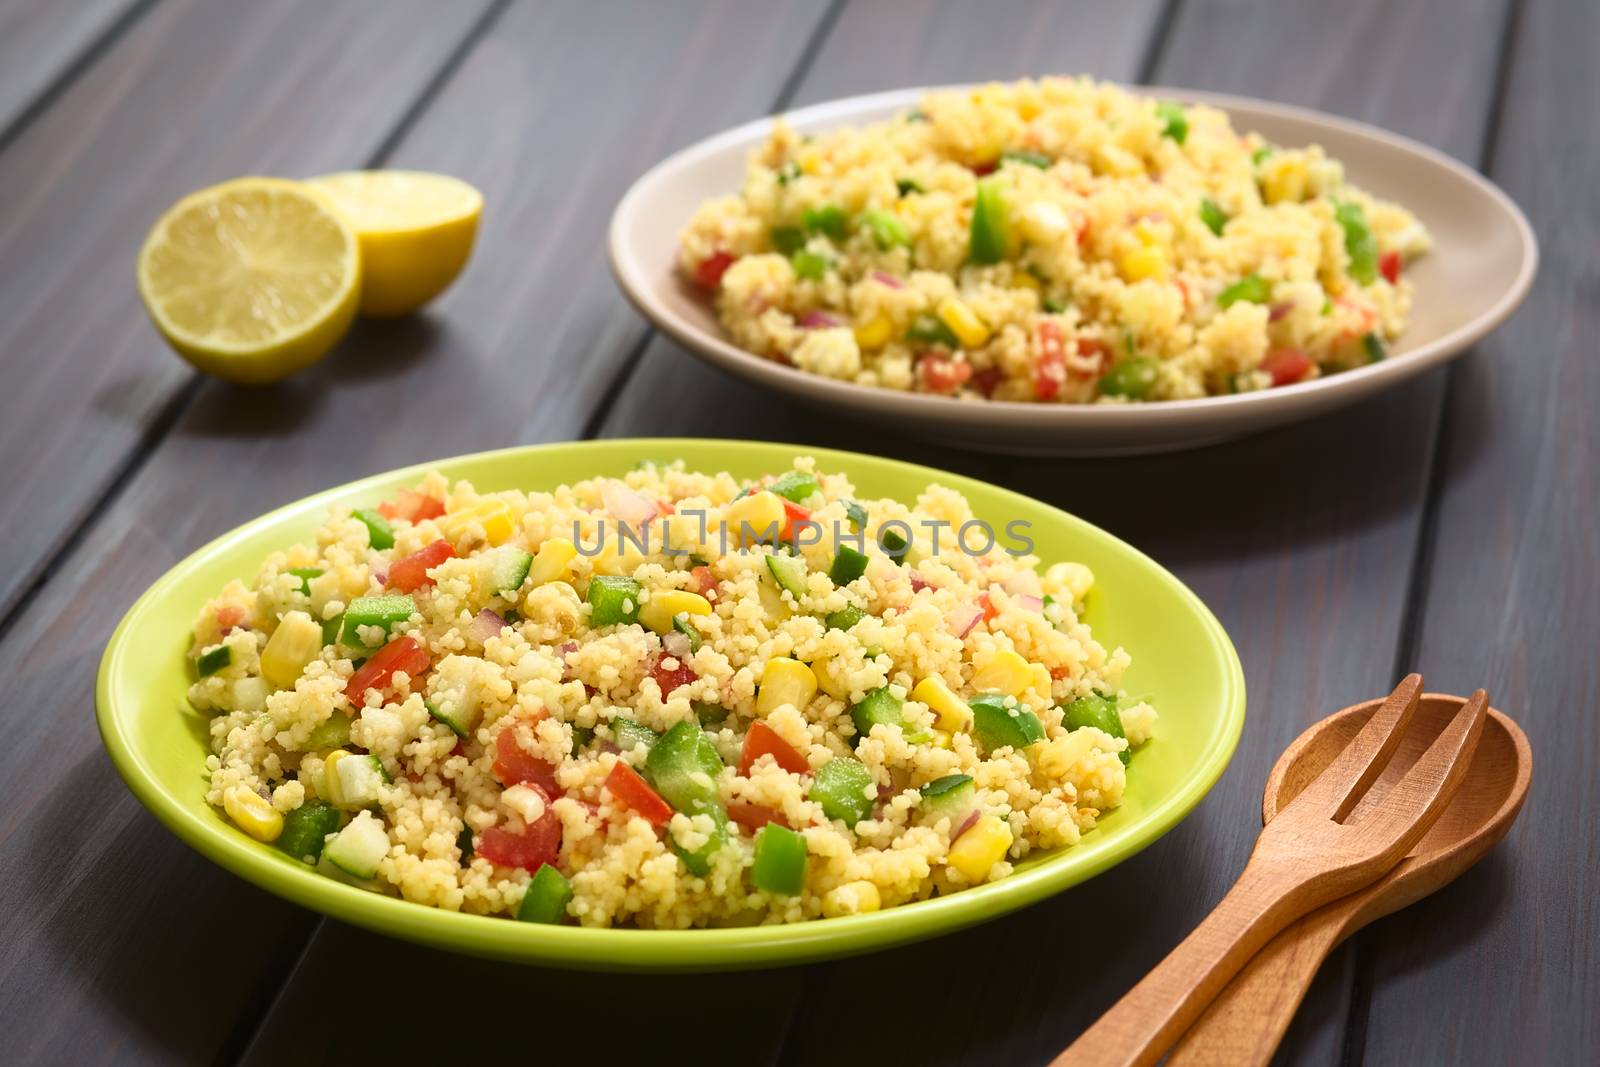 Vegetarian couscous salad made with bell pepper, tomato, cucumber, red onion and sweet corn kernels, served on plates, cutlery and lemon on the side. Photographed on dark wood with natural light. (Selective Focus, Focus one third into the first salad)